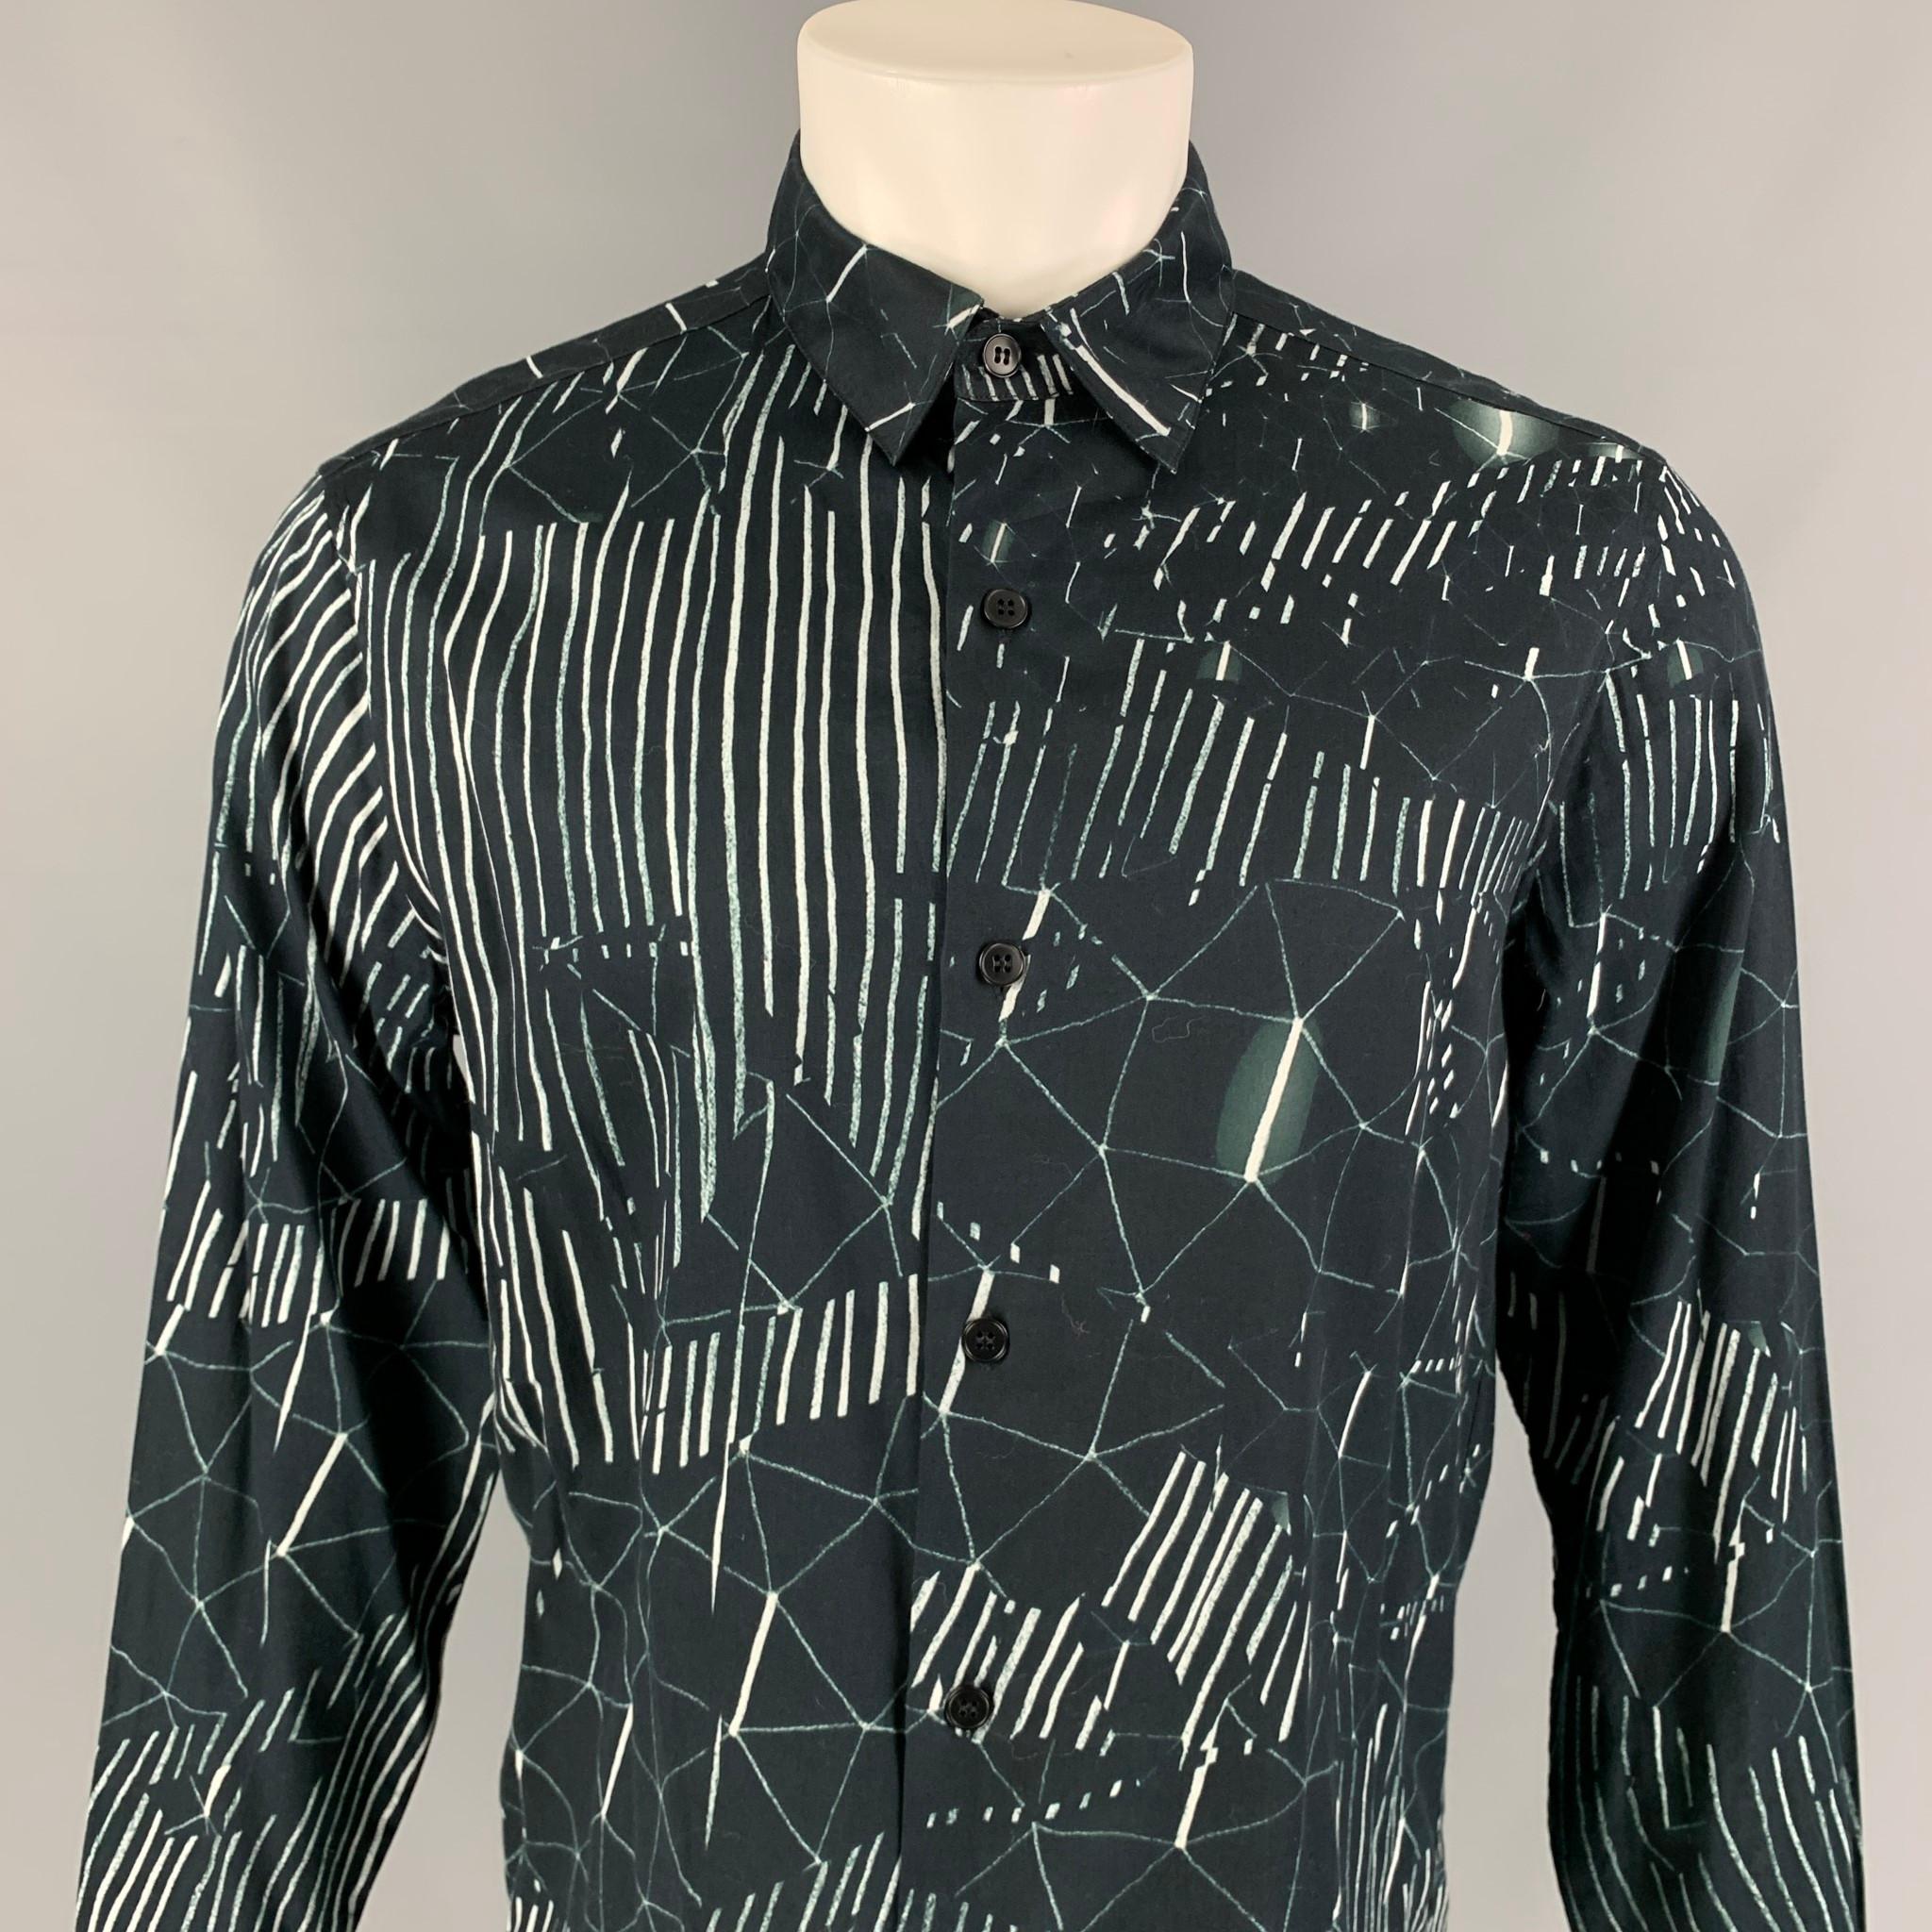 AGNES B. 'Baudelocque' long sleeve shirt comes in a navy & white print cotton featuring a spread collar and a button up closure. 

Very Good Pre-Owned Condition.
Marked: 42

Measurements:

Shoulder: 18 in.
Chest: 42 in.
Sleeve: 26 in.
Length: 28 in. 